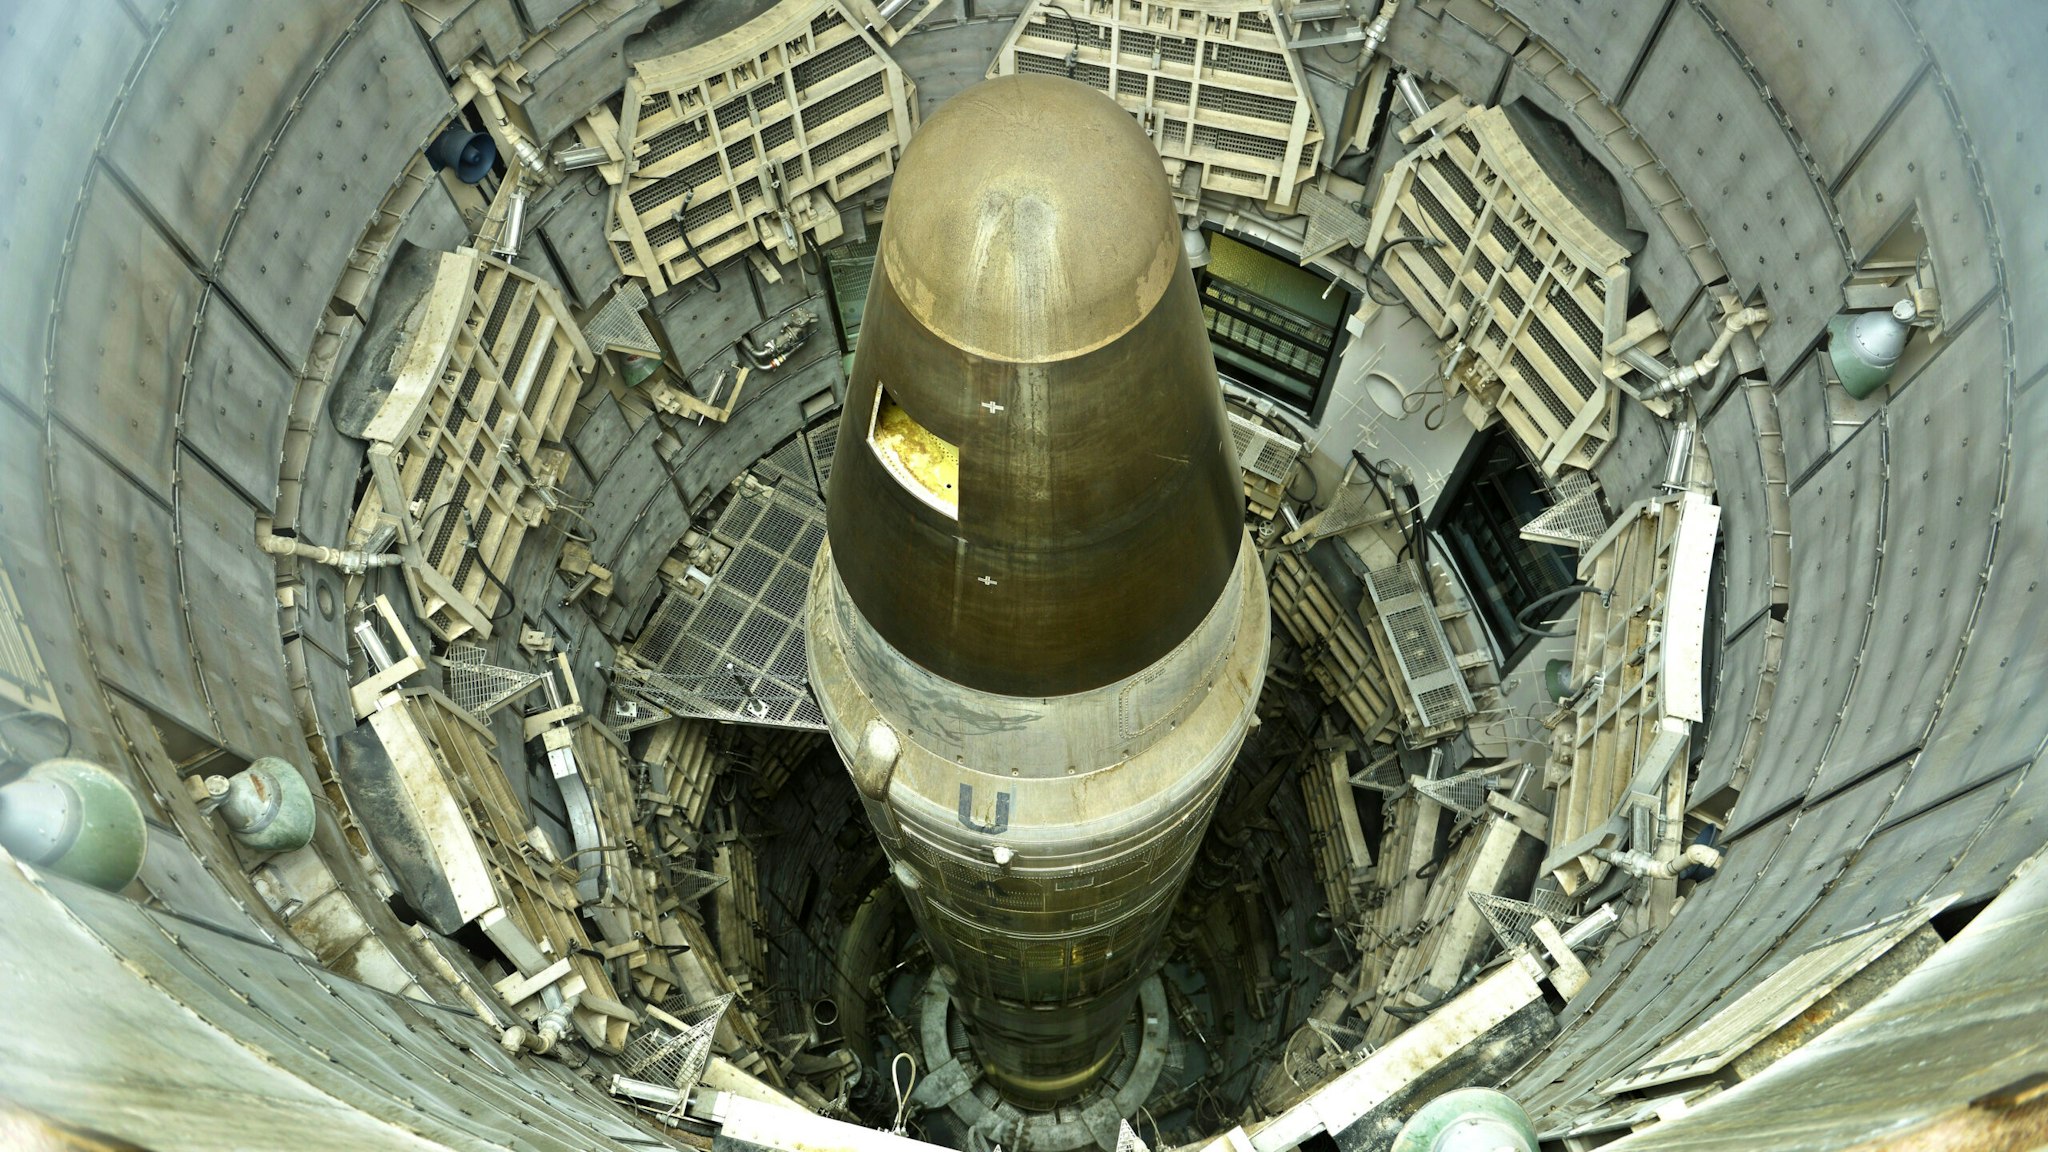 A deactivated Titan II nuclear ICMB is seen in a silo at the Titan Missile Museum on May 12, 2015 in Green Valley, Arizona. The museum is located in a preserved Titan II ICBM launch complex and is devoted to educating visitors about the Cold War and the Titan II missile's contribution as a nuclear deterrent.